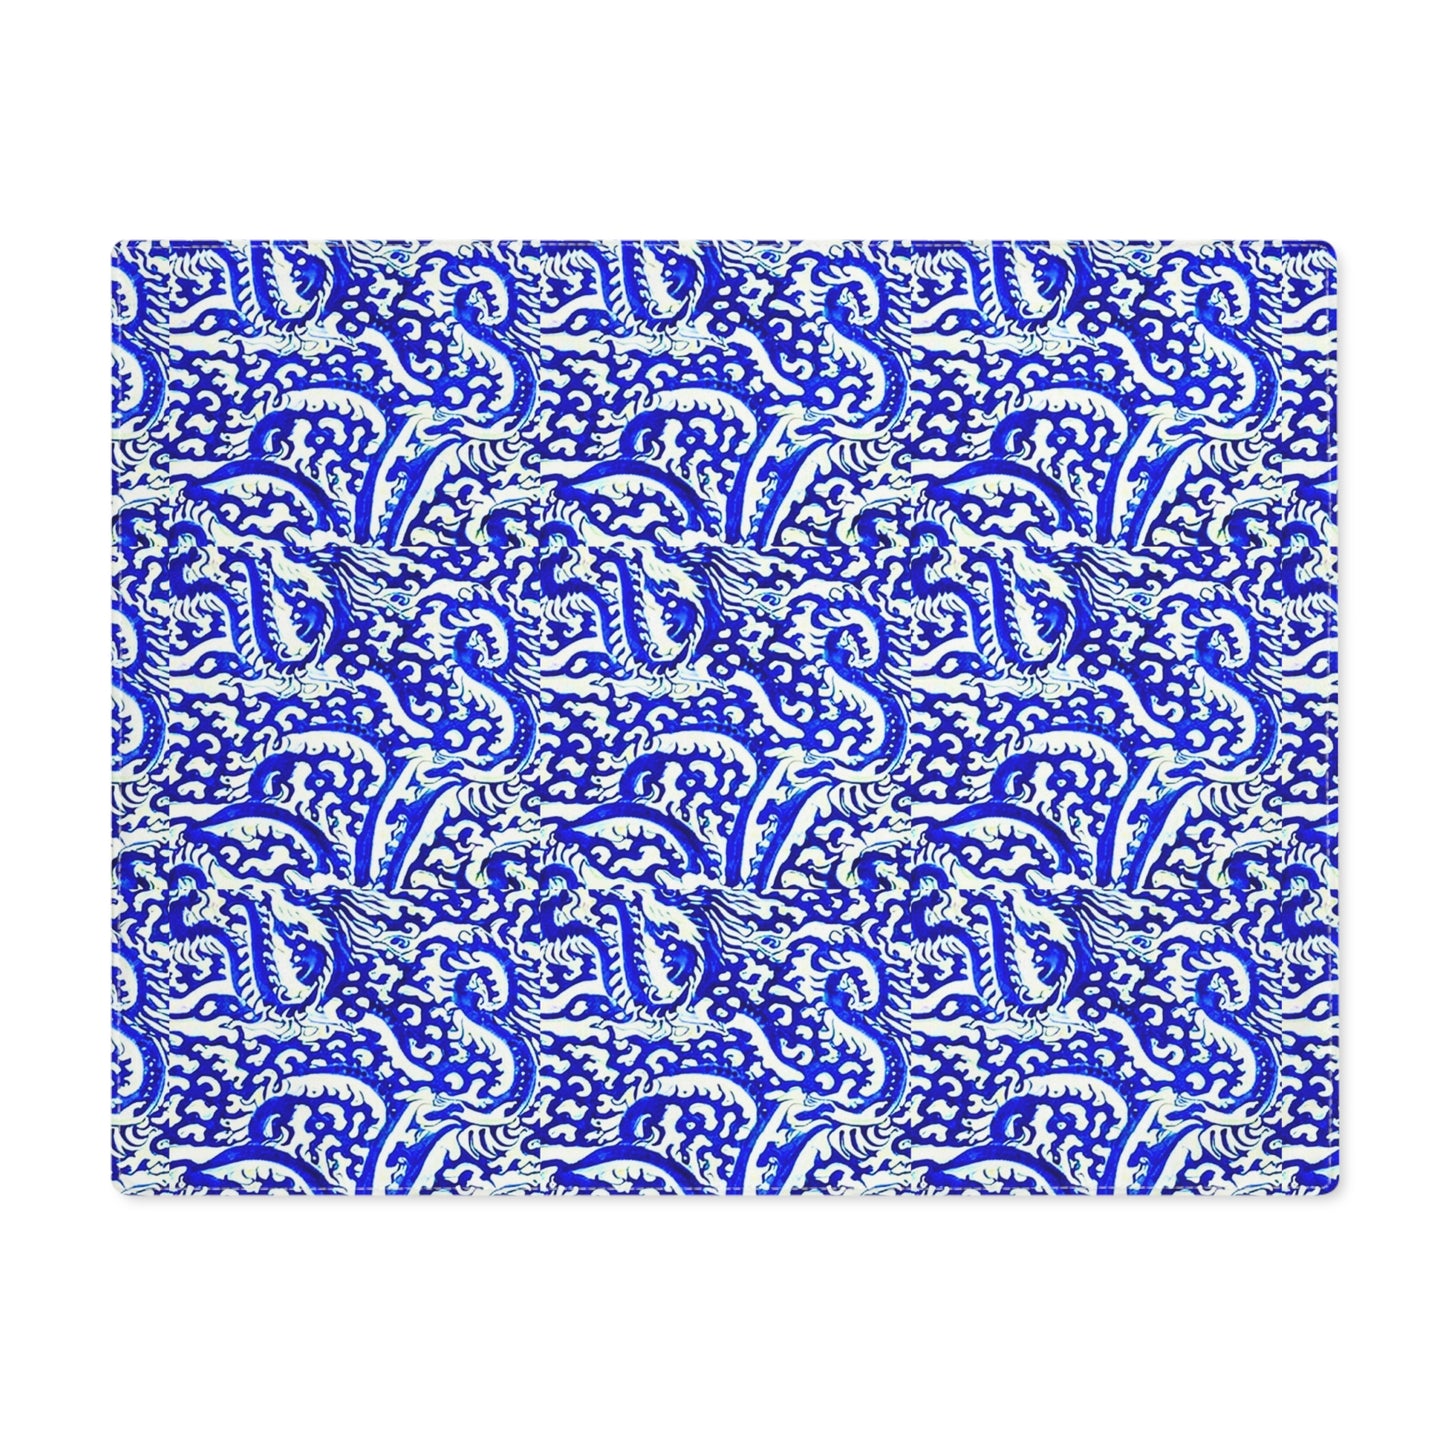 Sea of Chinese Dragons Ming Dynasty Blue and White Porcelain Tablescape Pattern Placemat, 1pc